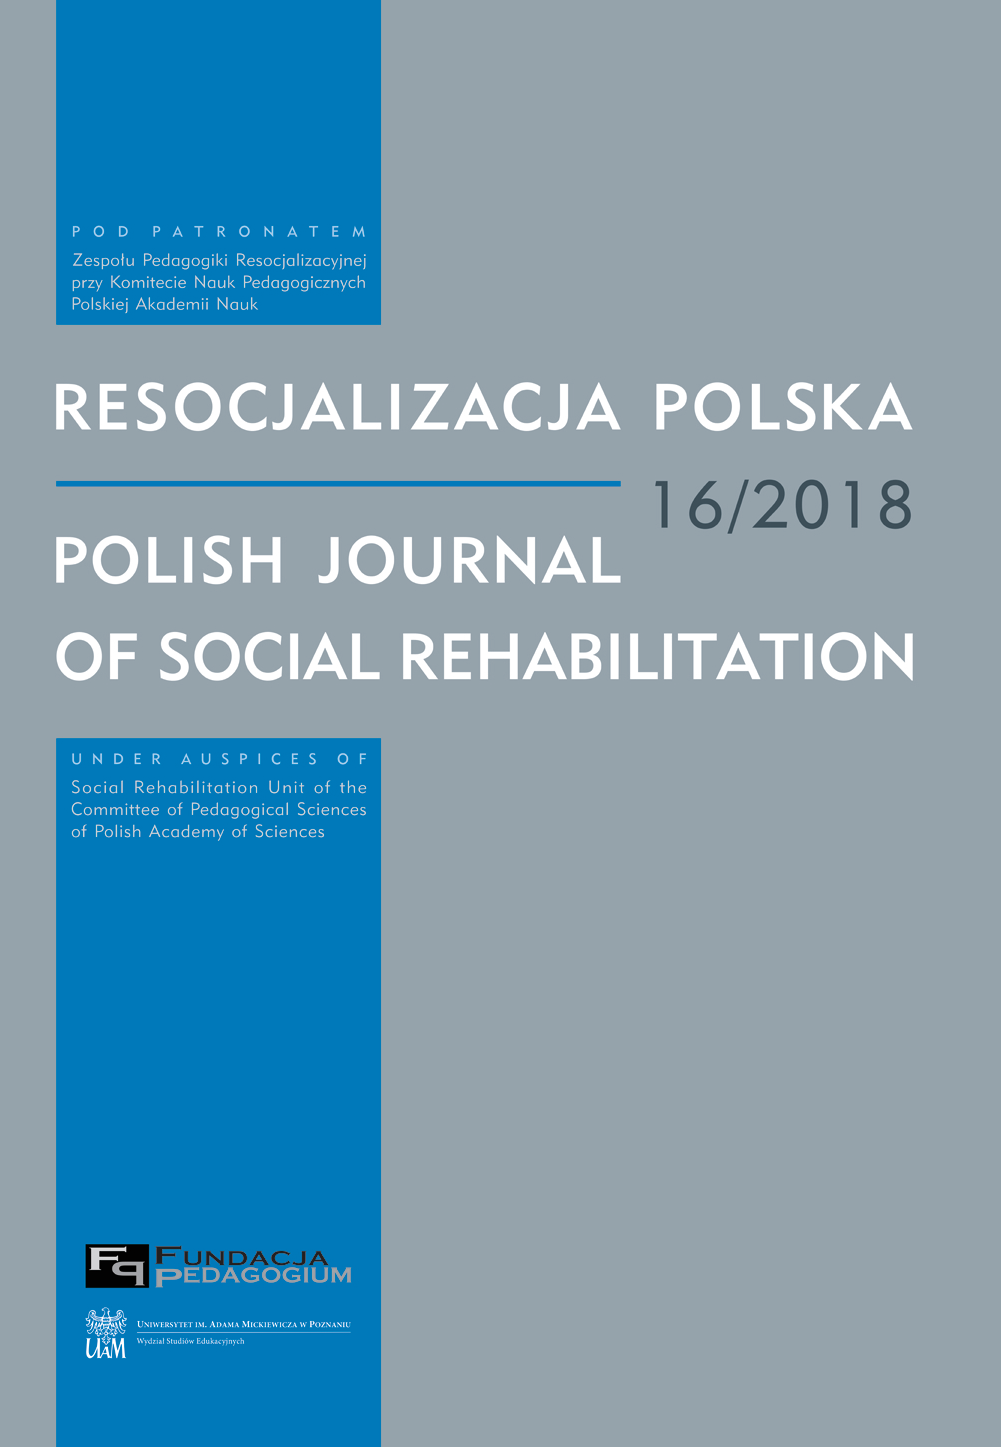 Persons with disability in penitentiary isolation – appearances and reality